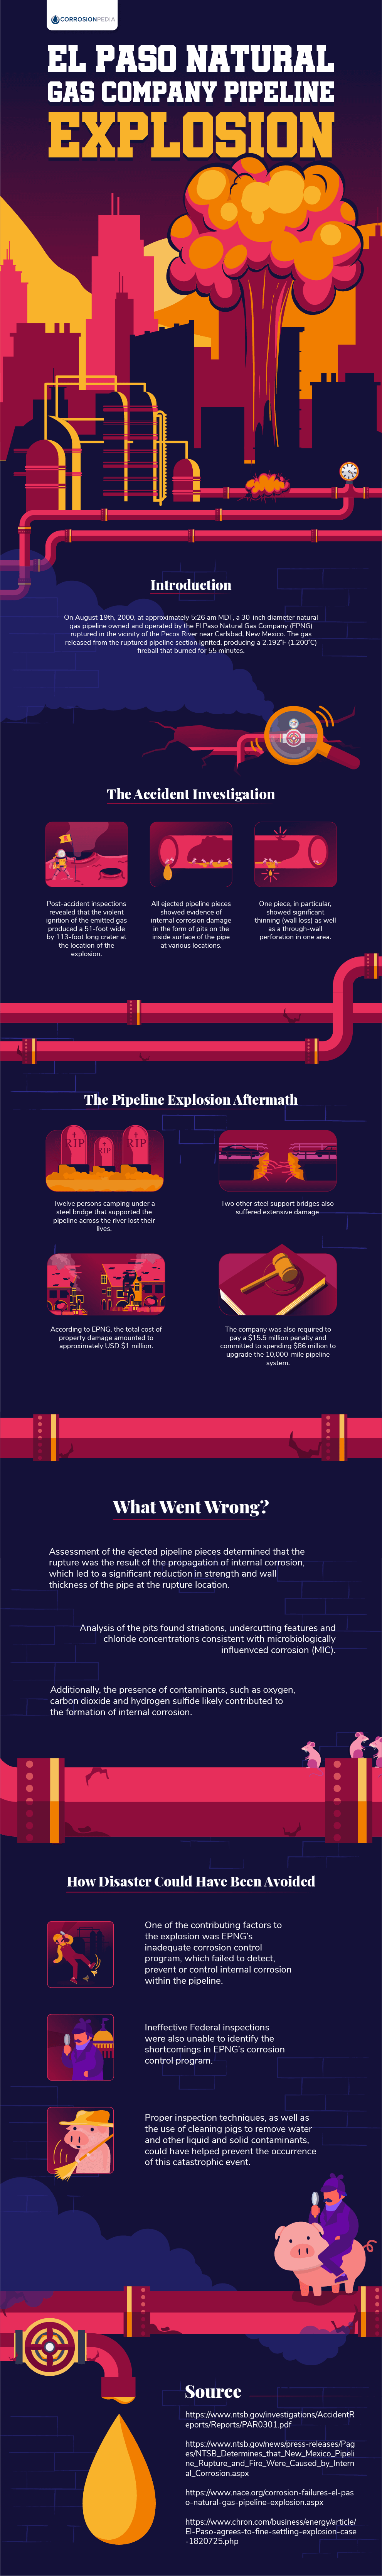 INFOGRAPHIC: The El Paso Natural Gas Company Pipeline Explosion